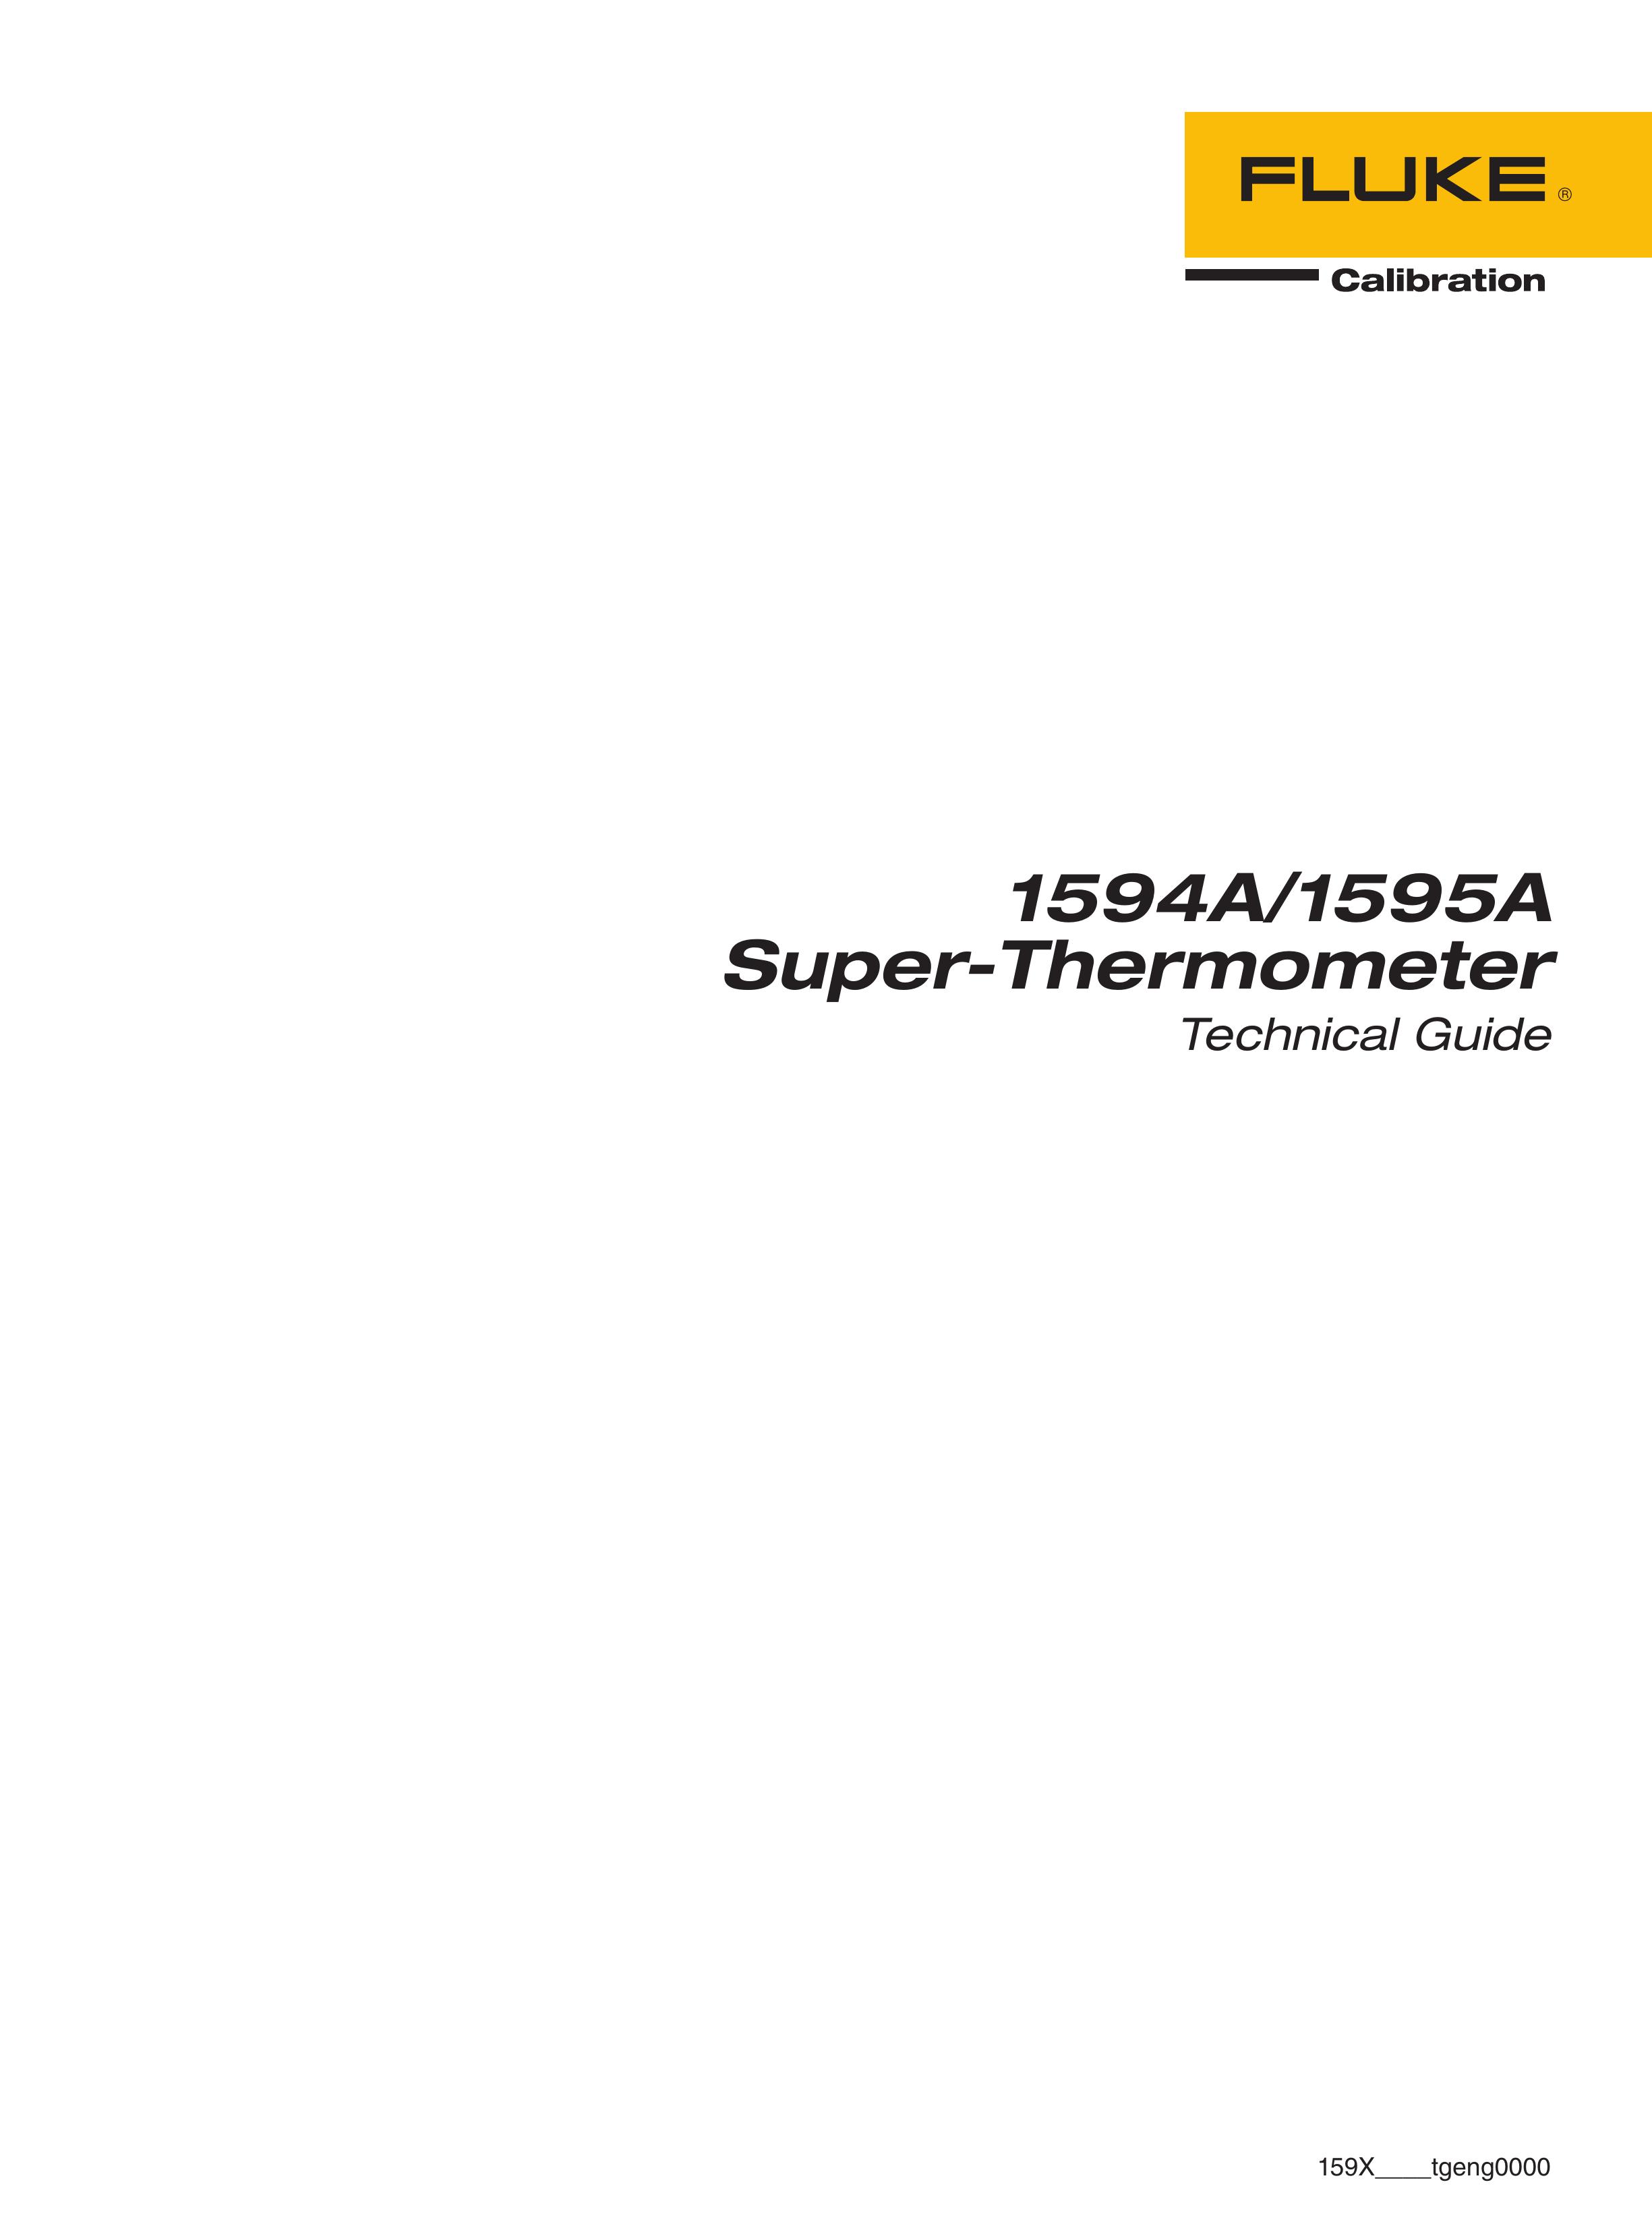 Fluke 1595A Thermometer User Manual